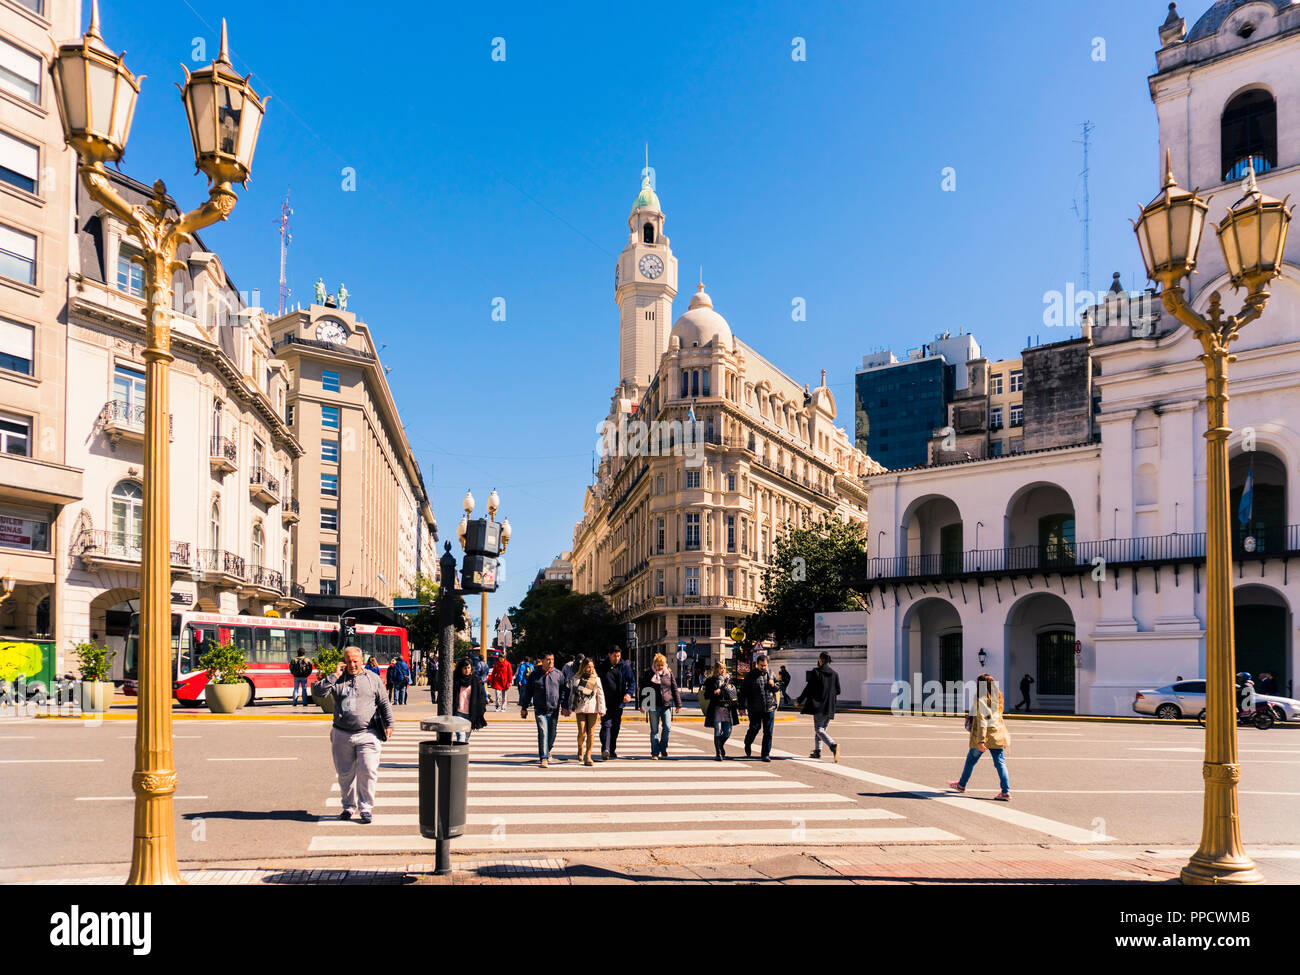 Street scene with pedestrians and zebra crossing in Recoleta district of Buenos Aires, Argentina Stock Photo